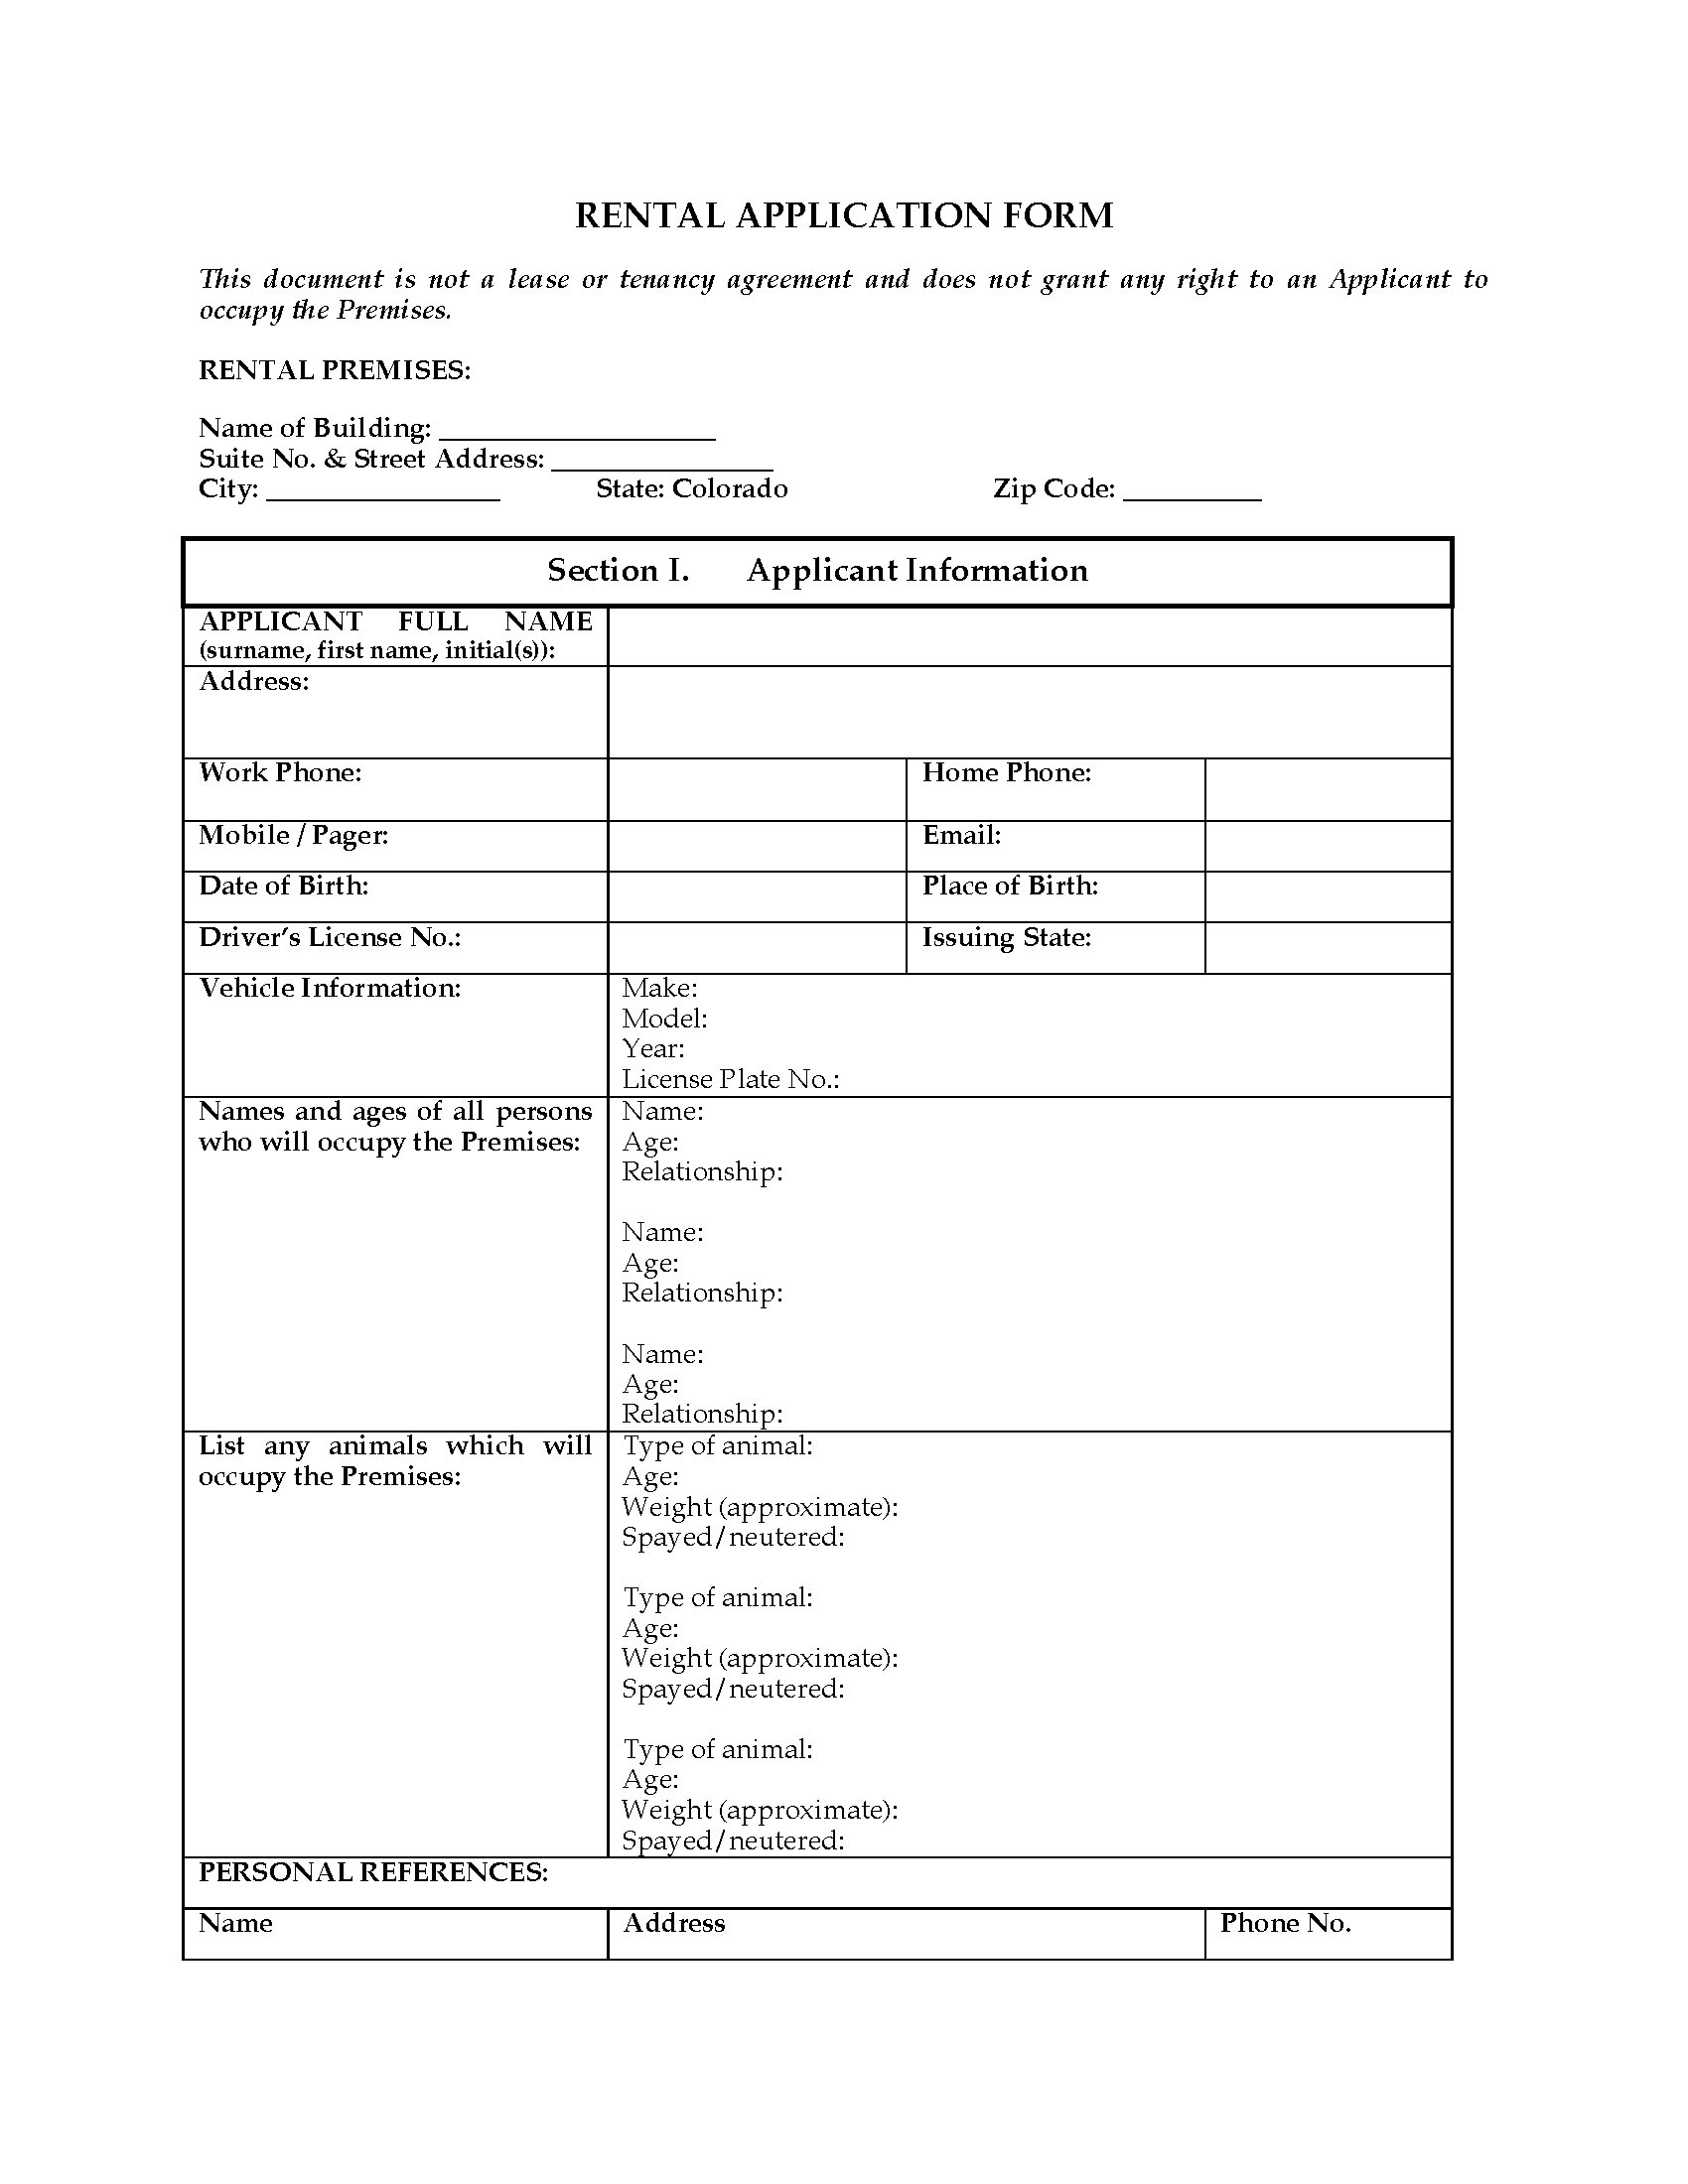 colorado-rental-application-form-legal-forms-and-business-templates